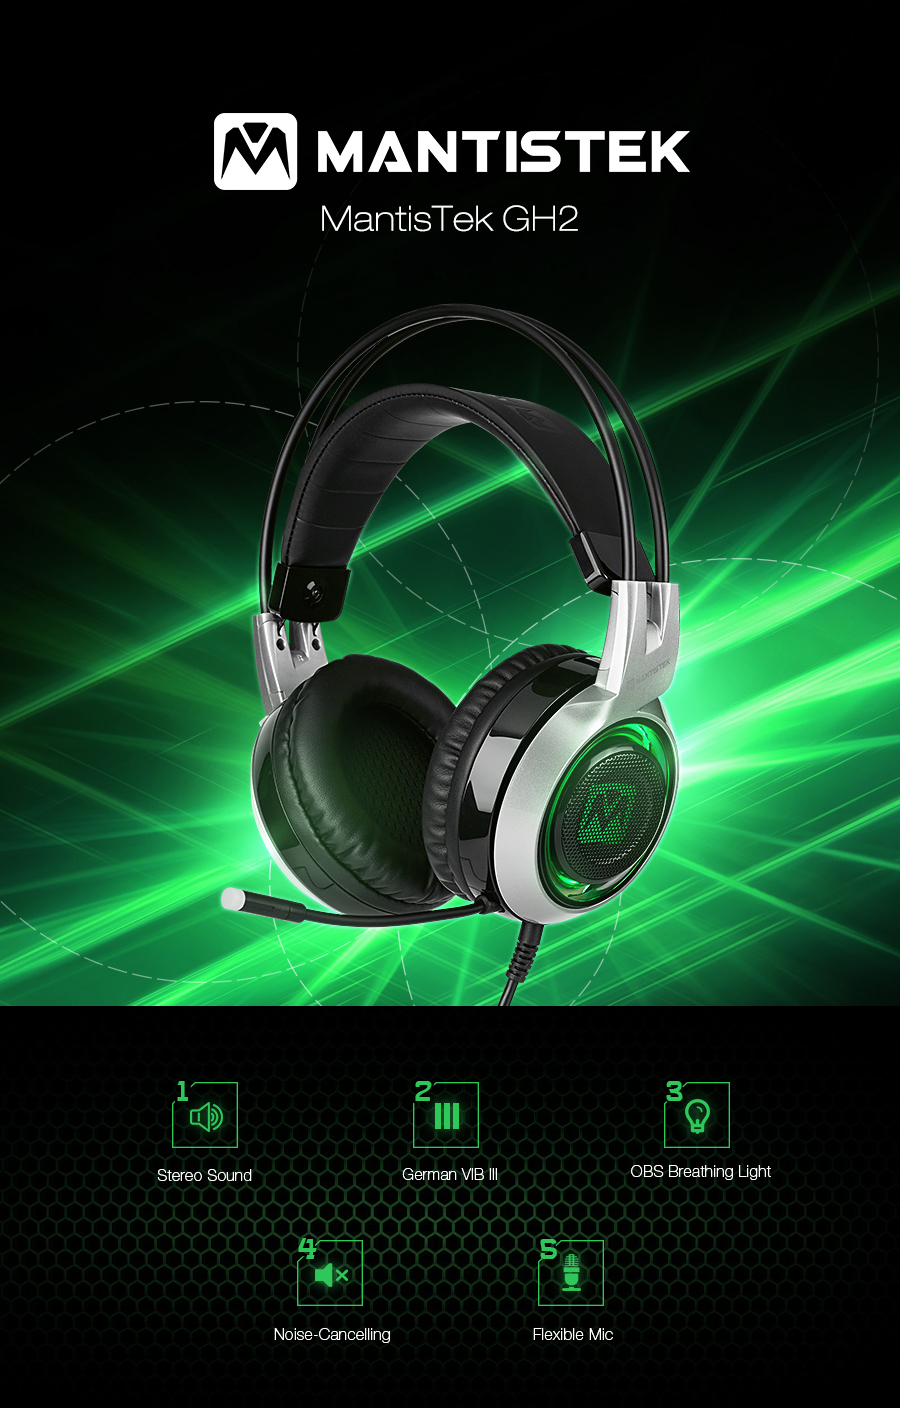 MantisTek® GH2 Smart Vibration Stereo Noise Canceling Gaming Headphone with Microphone 7